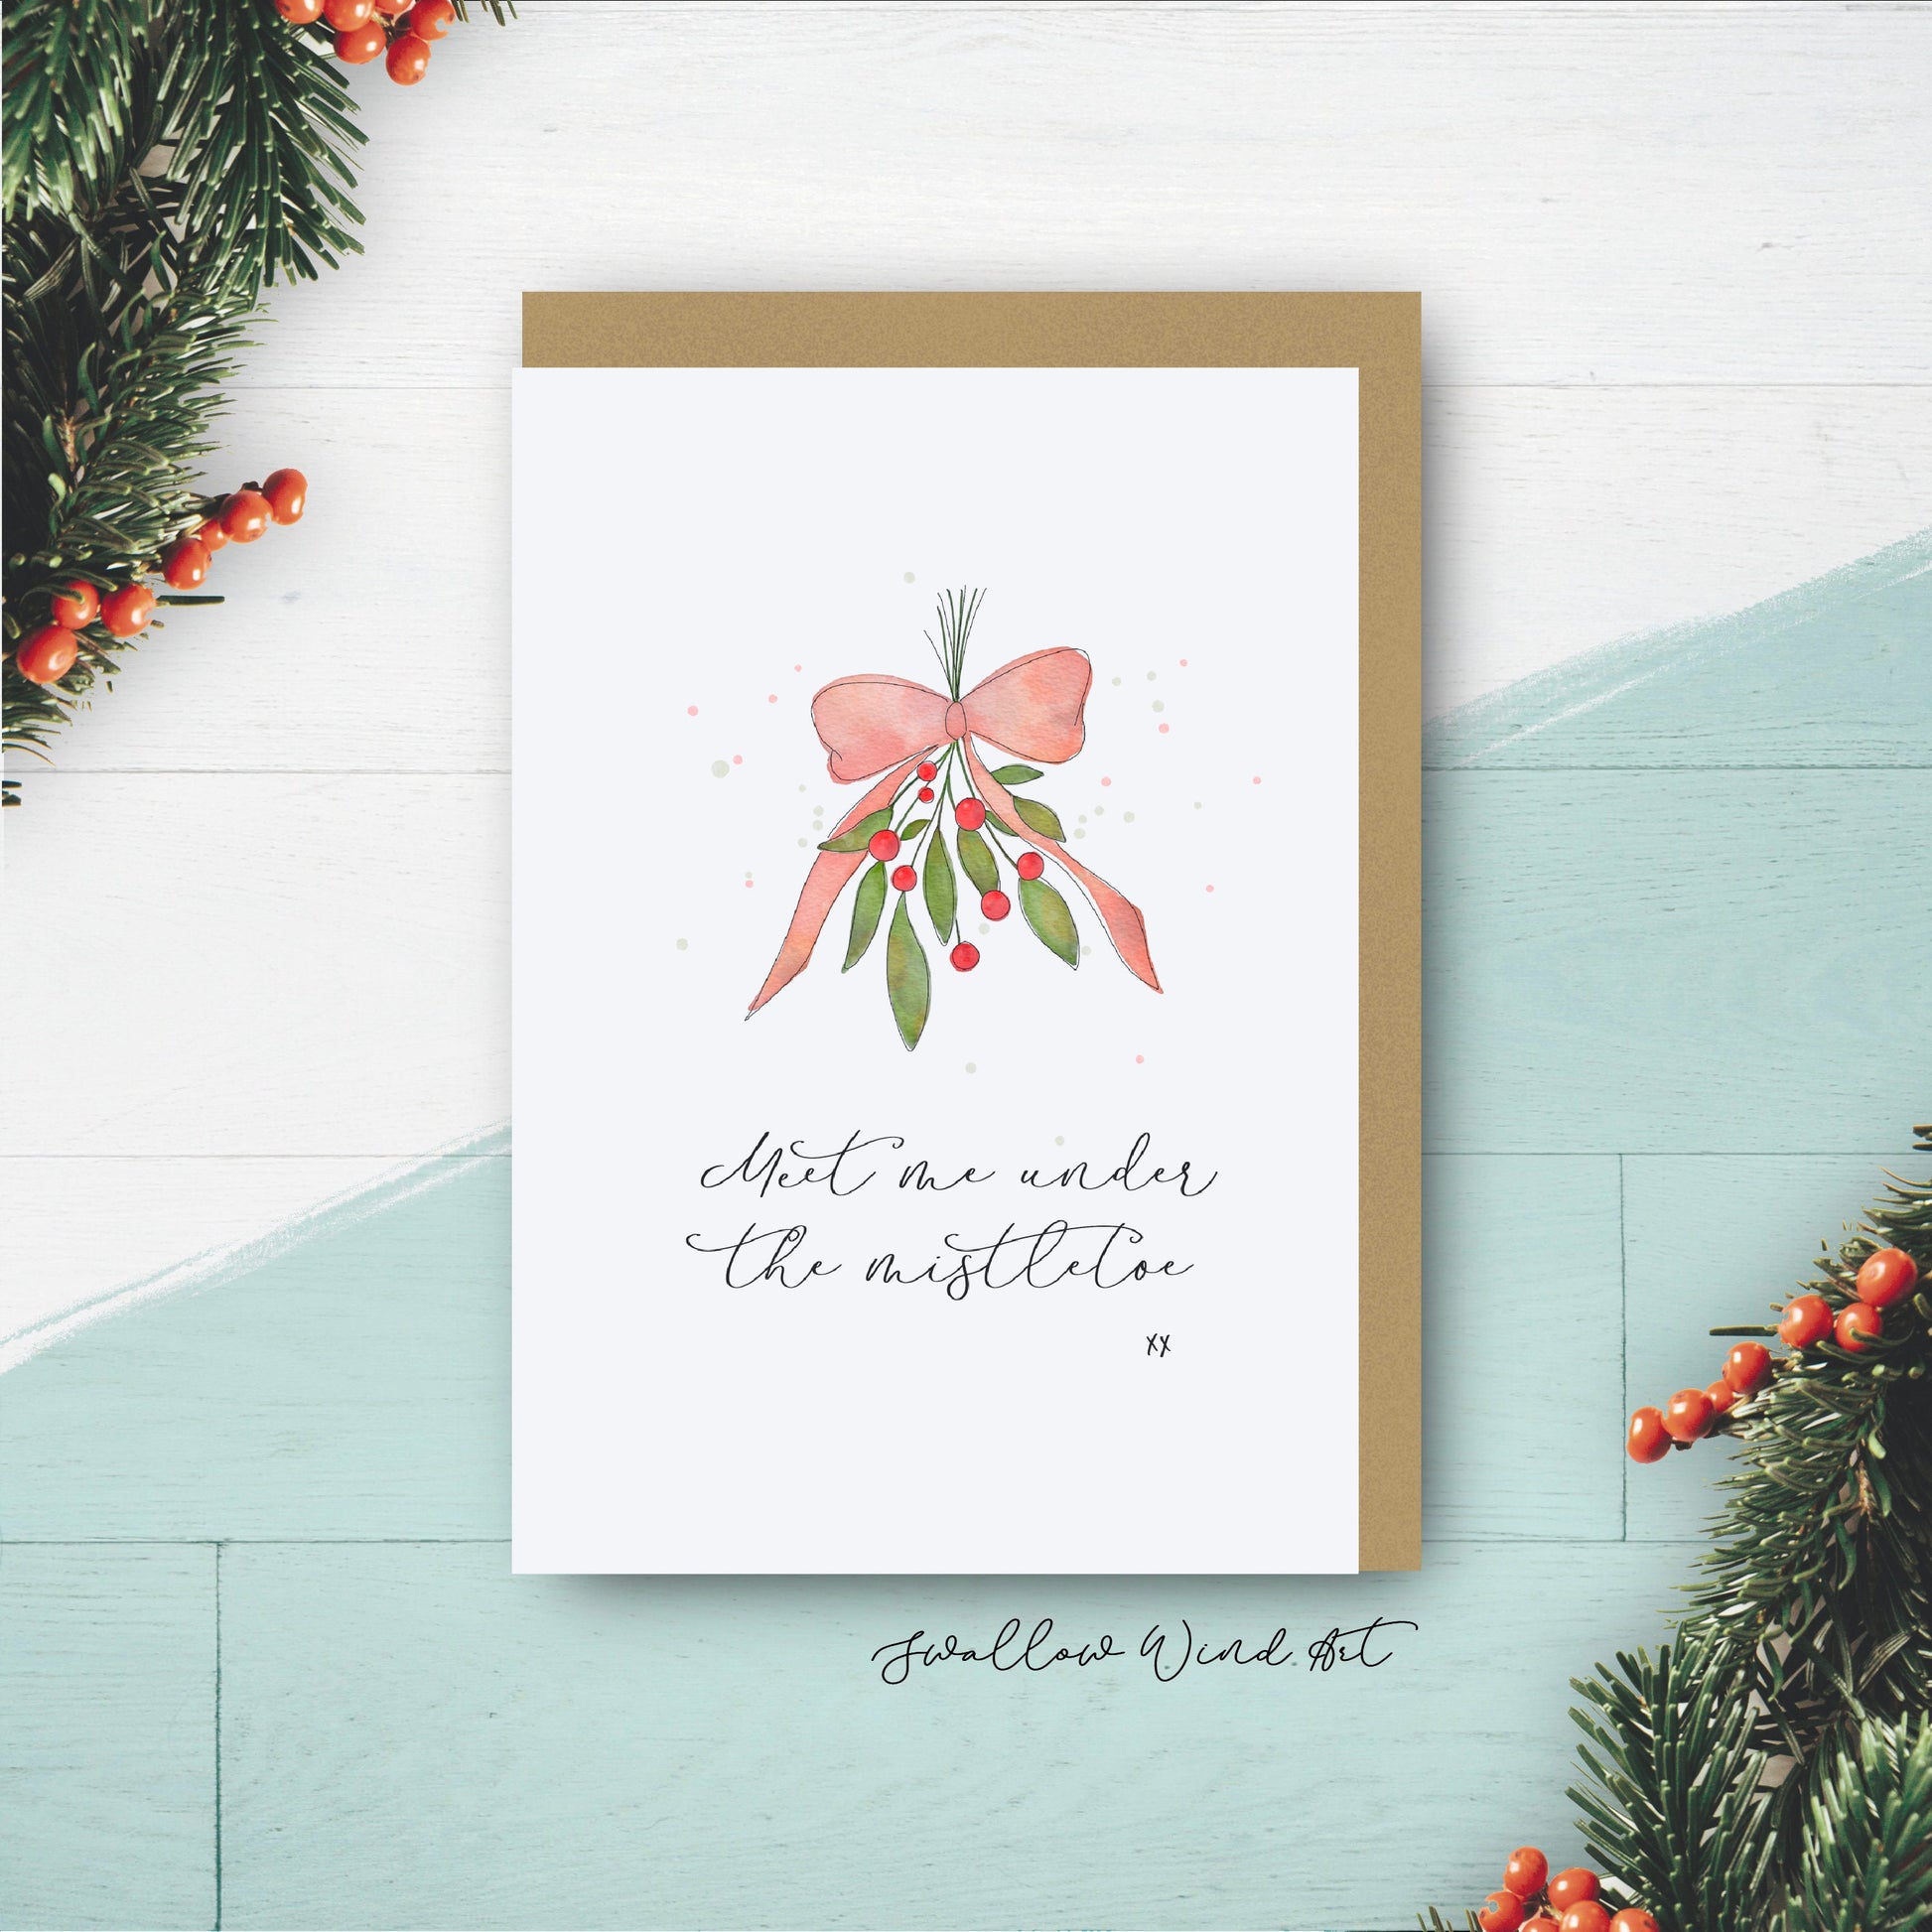 Greeting card with lettering "Meet me under the mistletoe xx" with watercolour illustration of mistletoe tied with red ribbon